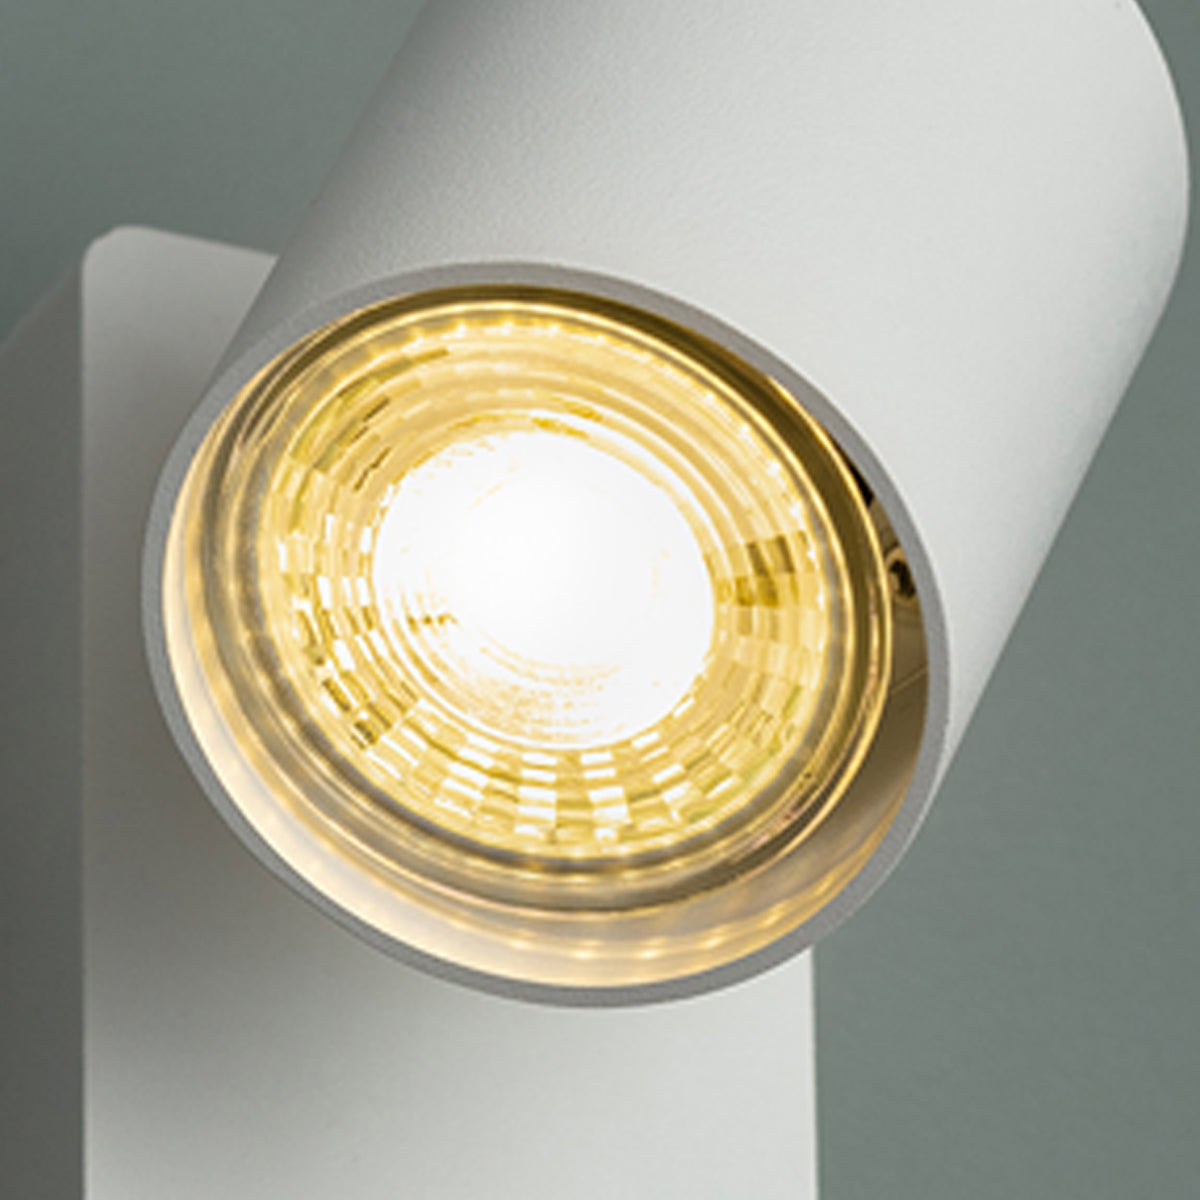 The white Nell lamp consists of a cylindrical spotlight, which can be tilted and adjusted on its own axis. The spotlight is attached to a rectangular bracket, which makes it equally suitable for mounting on walls and ceilings. Made of an aluminium body and powder coated white, the lamp with its simple design fits well into different spaces. 